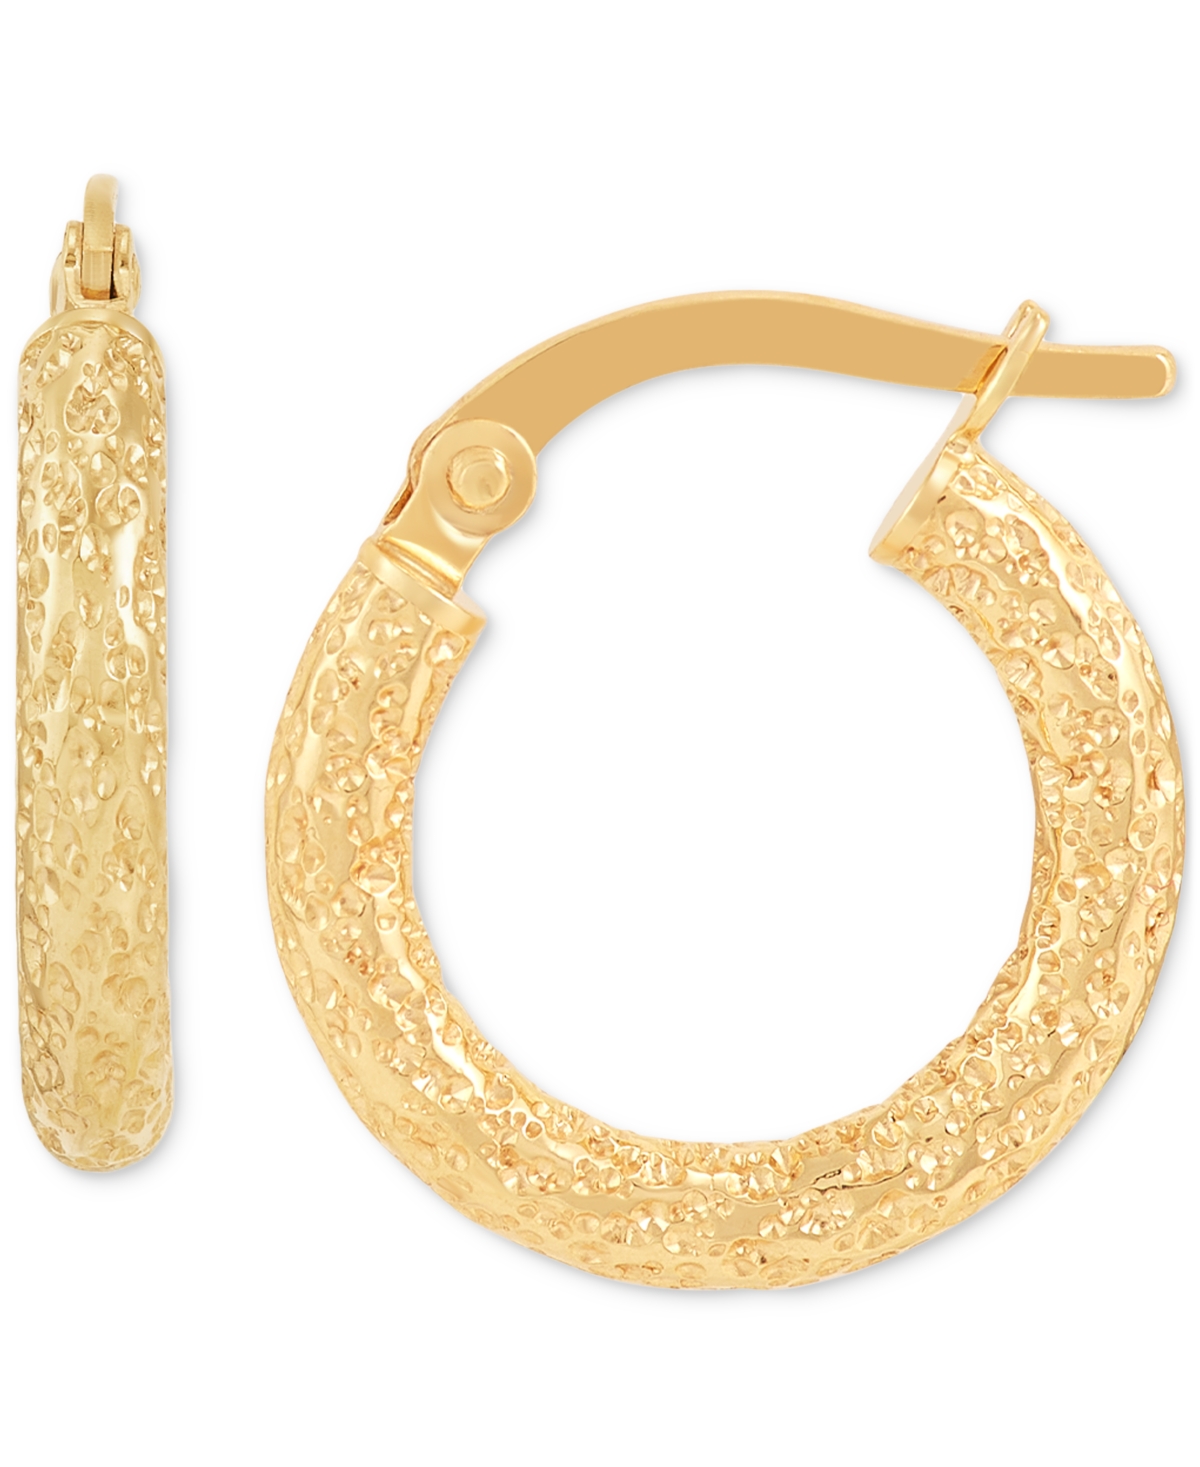 Textured Tube Small Hoop Earrings in 10k Gold, 5/8" - Gold